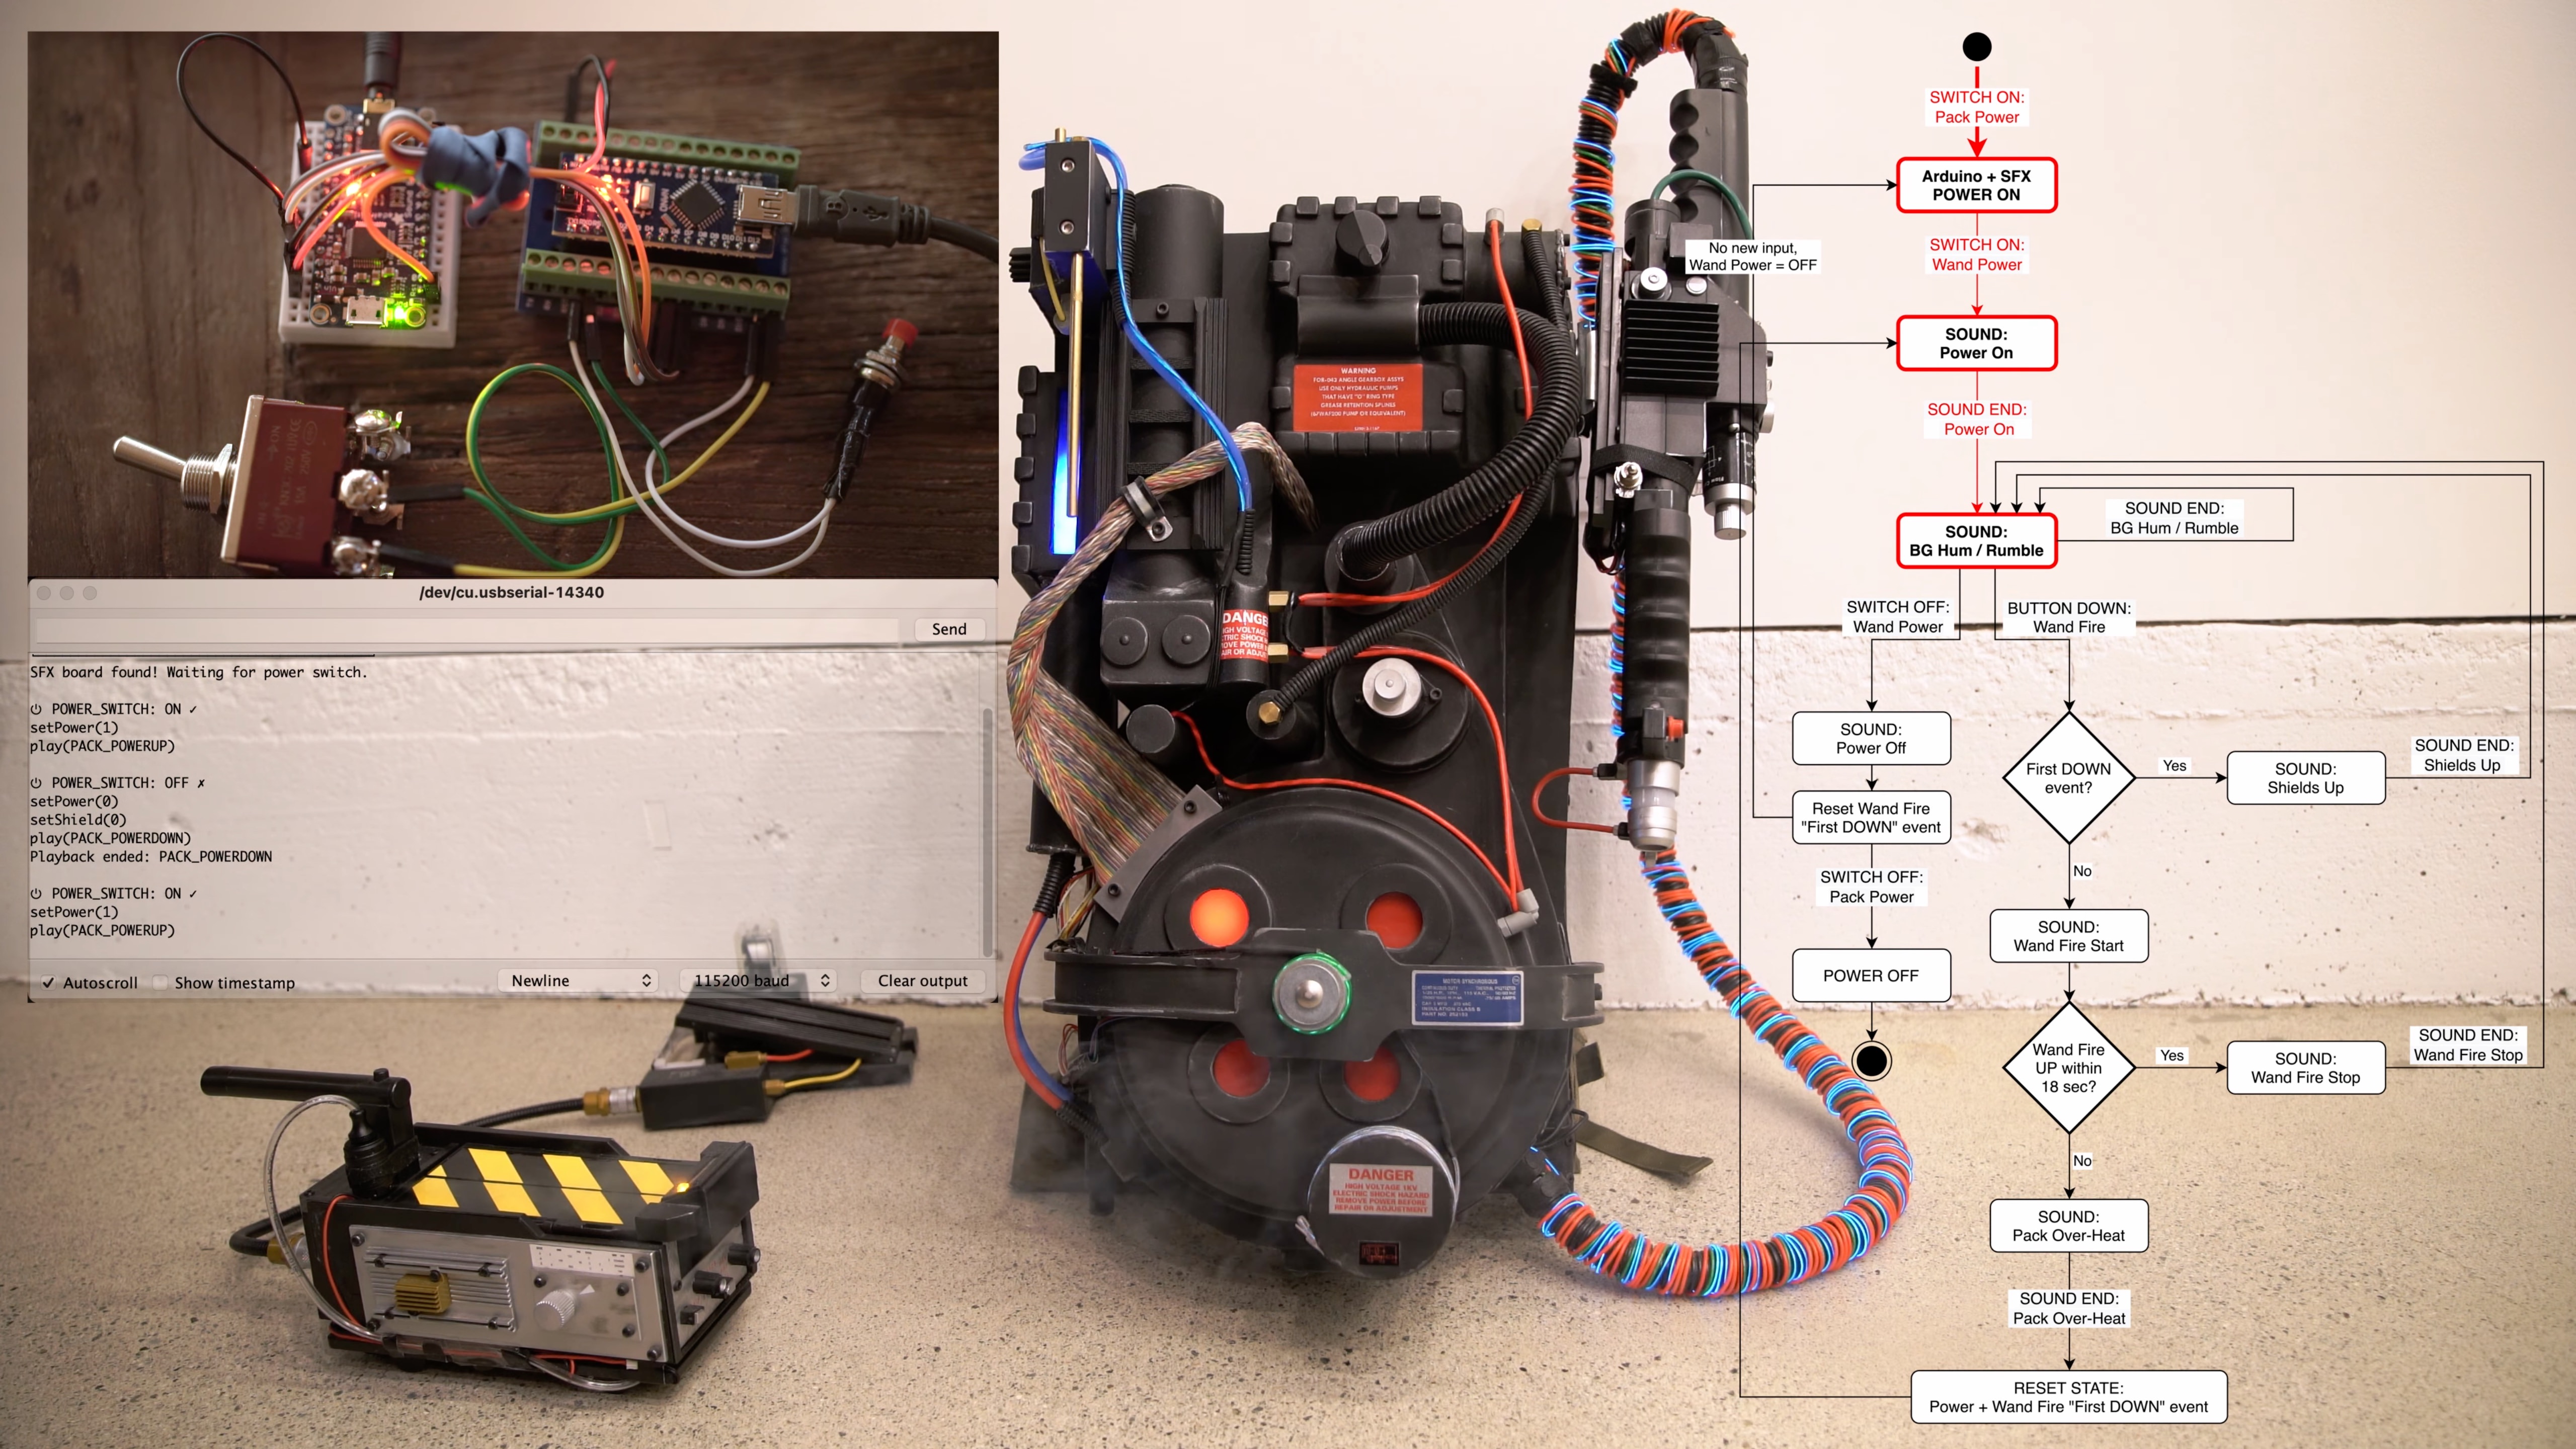 Part of a YouTube video, a walk-through and demonstration of the logic for my DIY proton pack sound effects project.